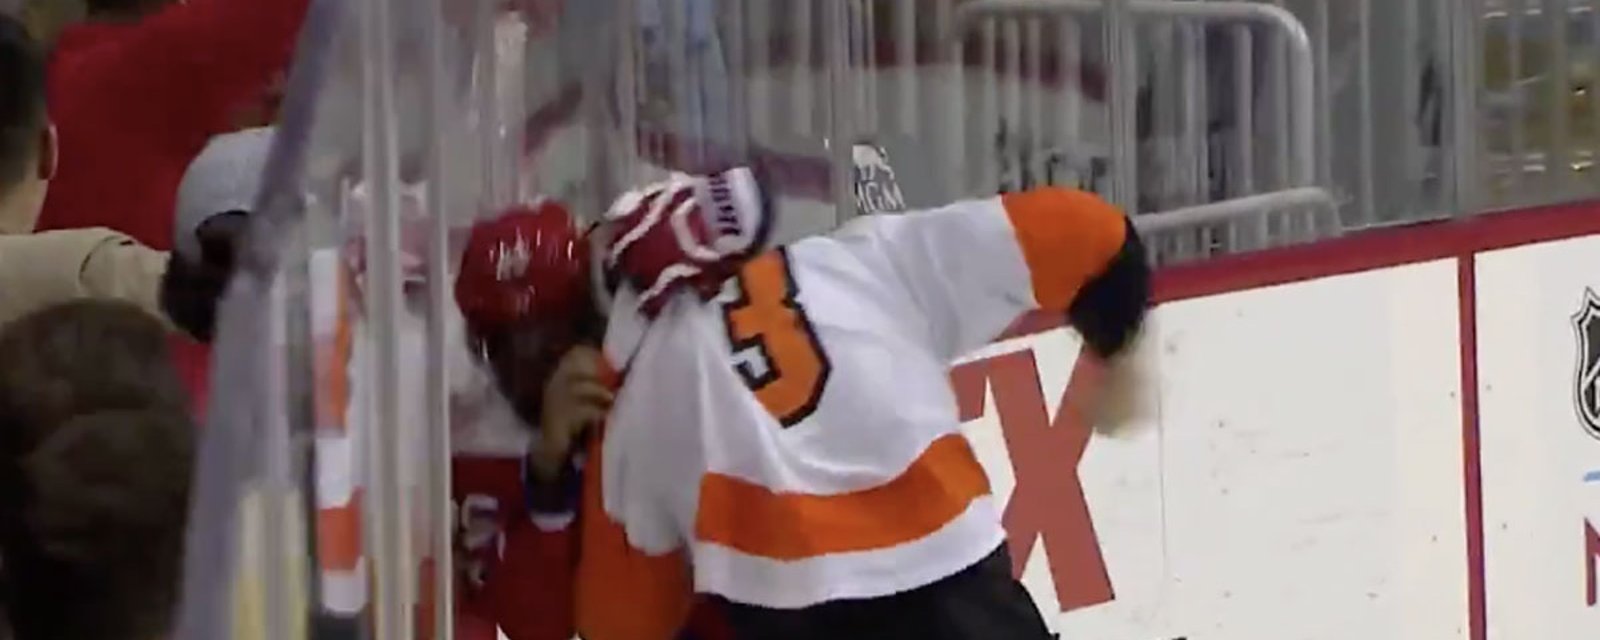 Breaking: DSP grabs Gudas and gives him no choice but to fight despite clean hit (for once!) 